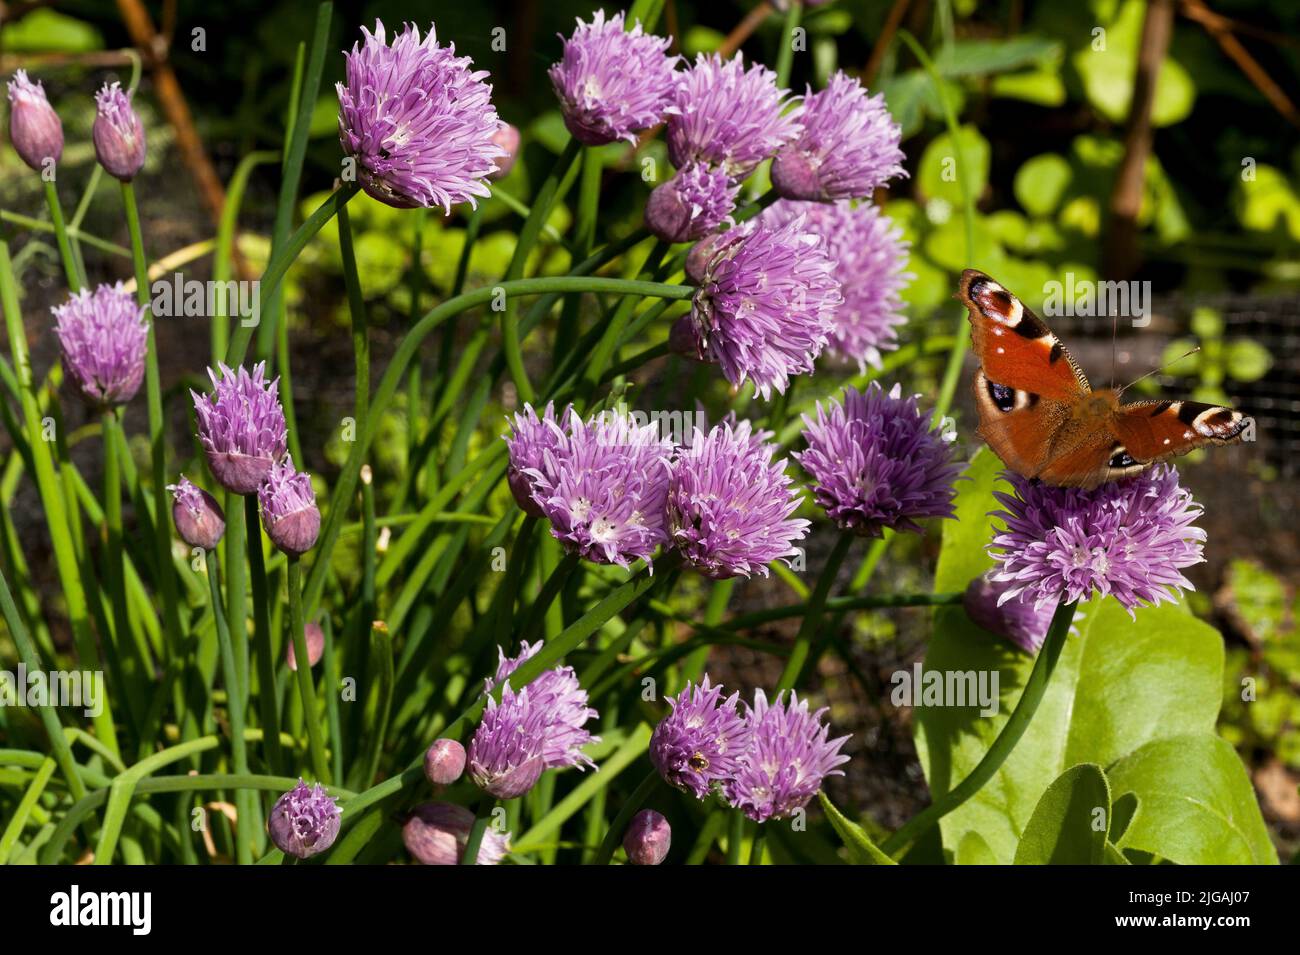 Peacock butterfly on purple Chive flowers Stock Photo